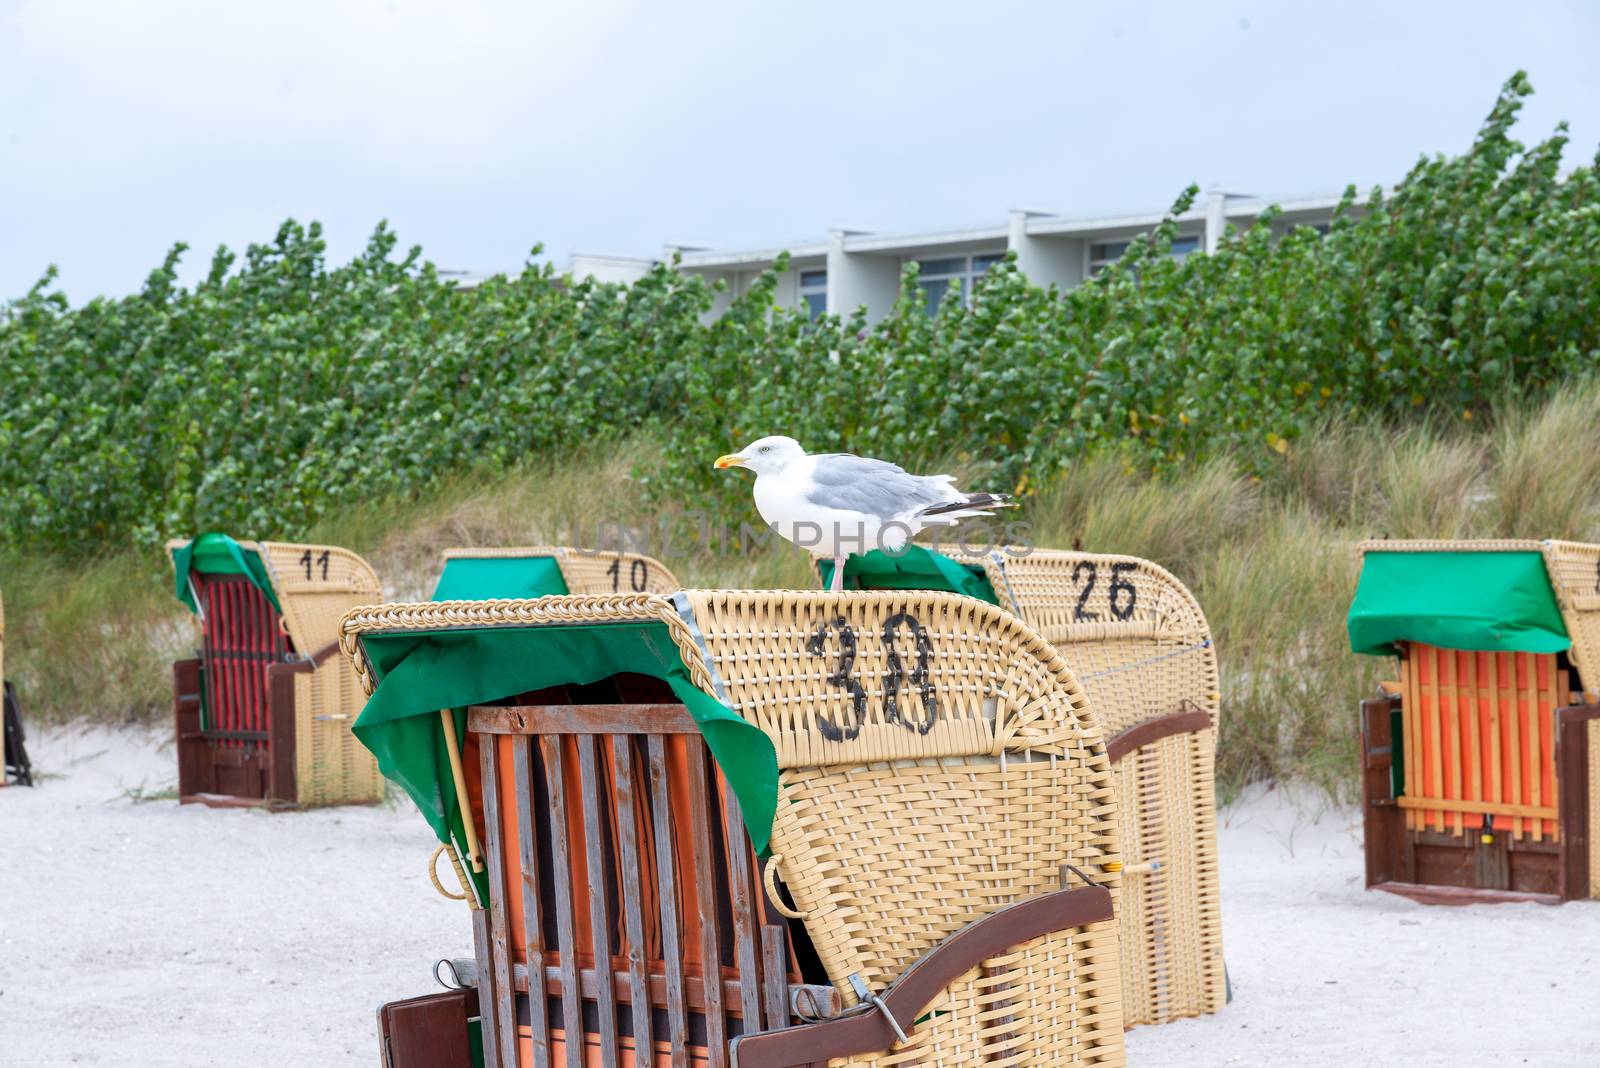 Seagull resting on a wicker basket by Guinness